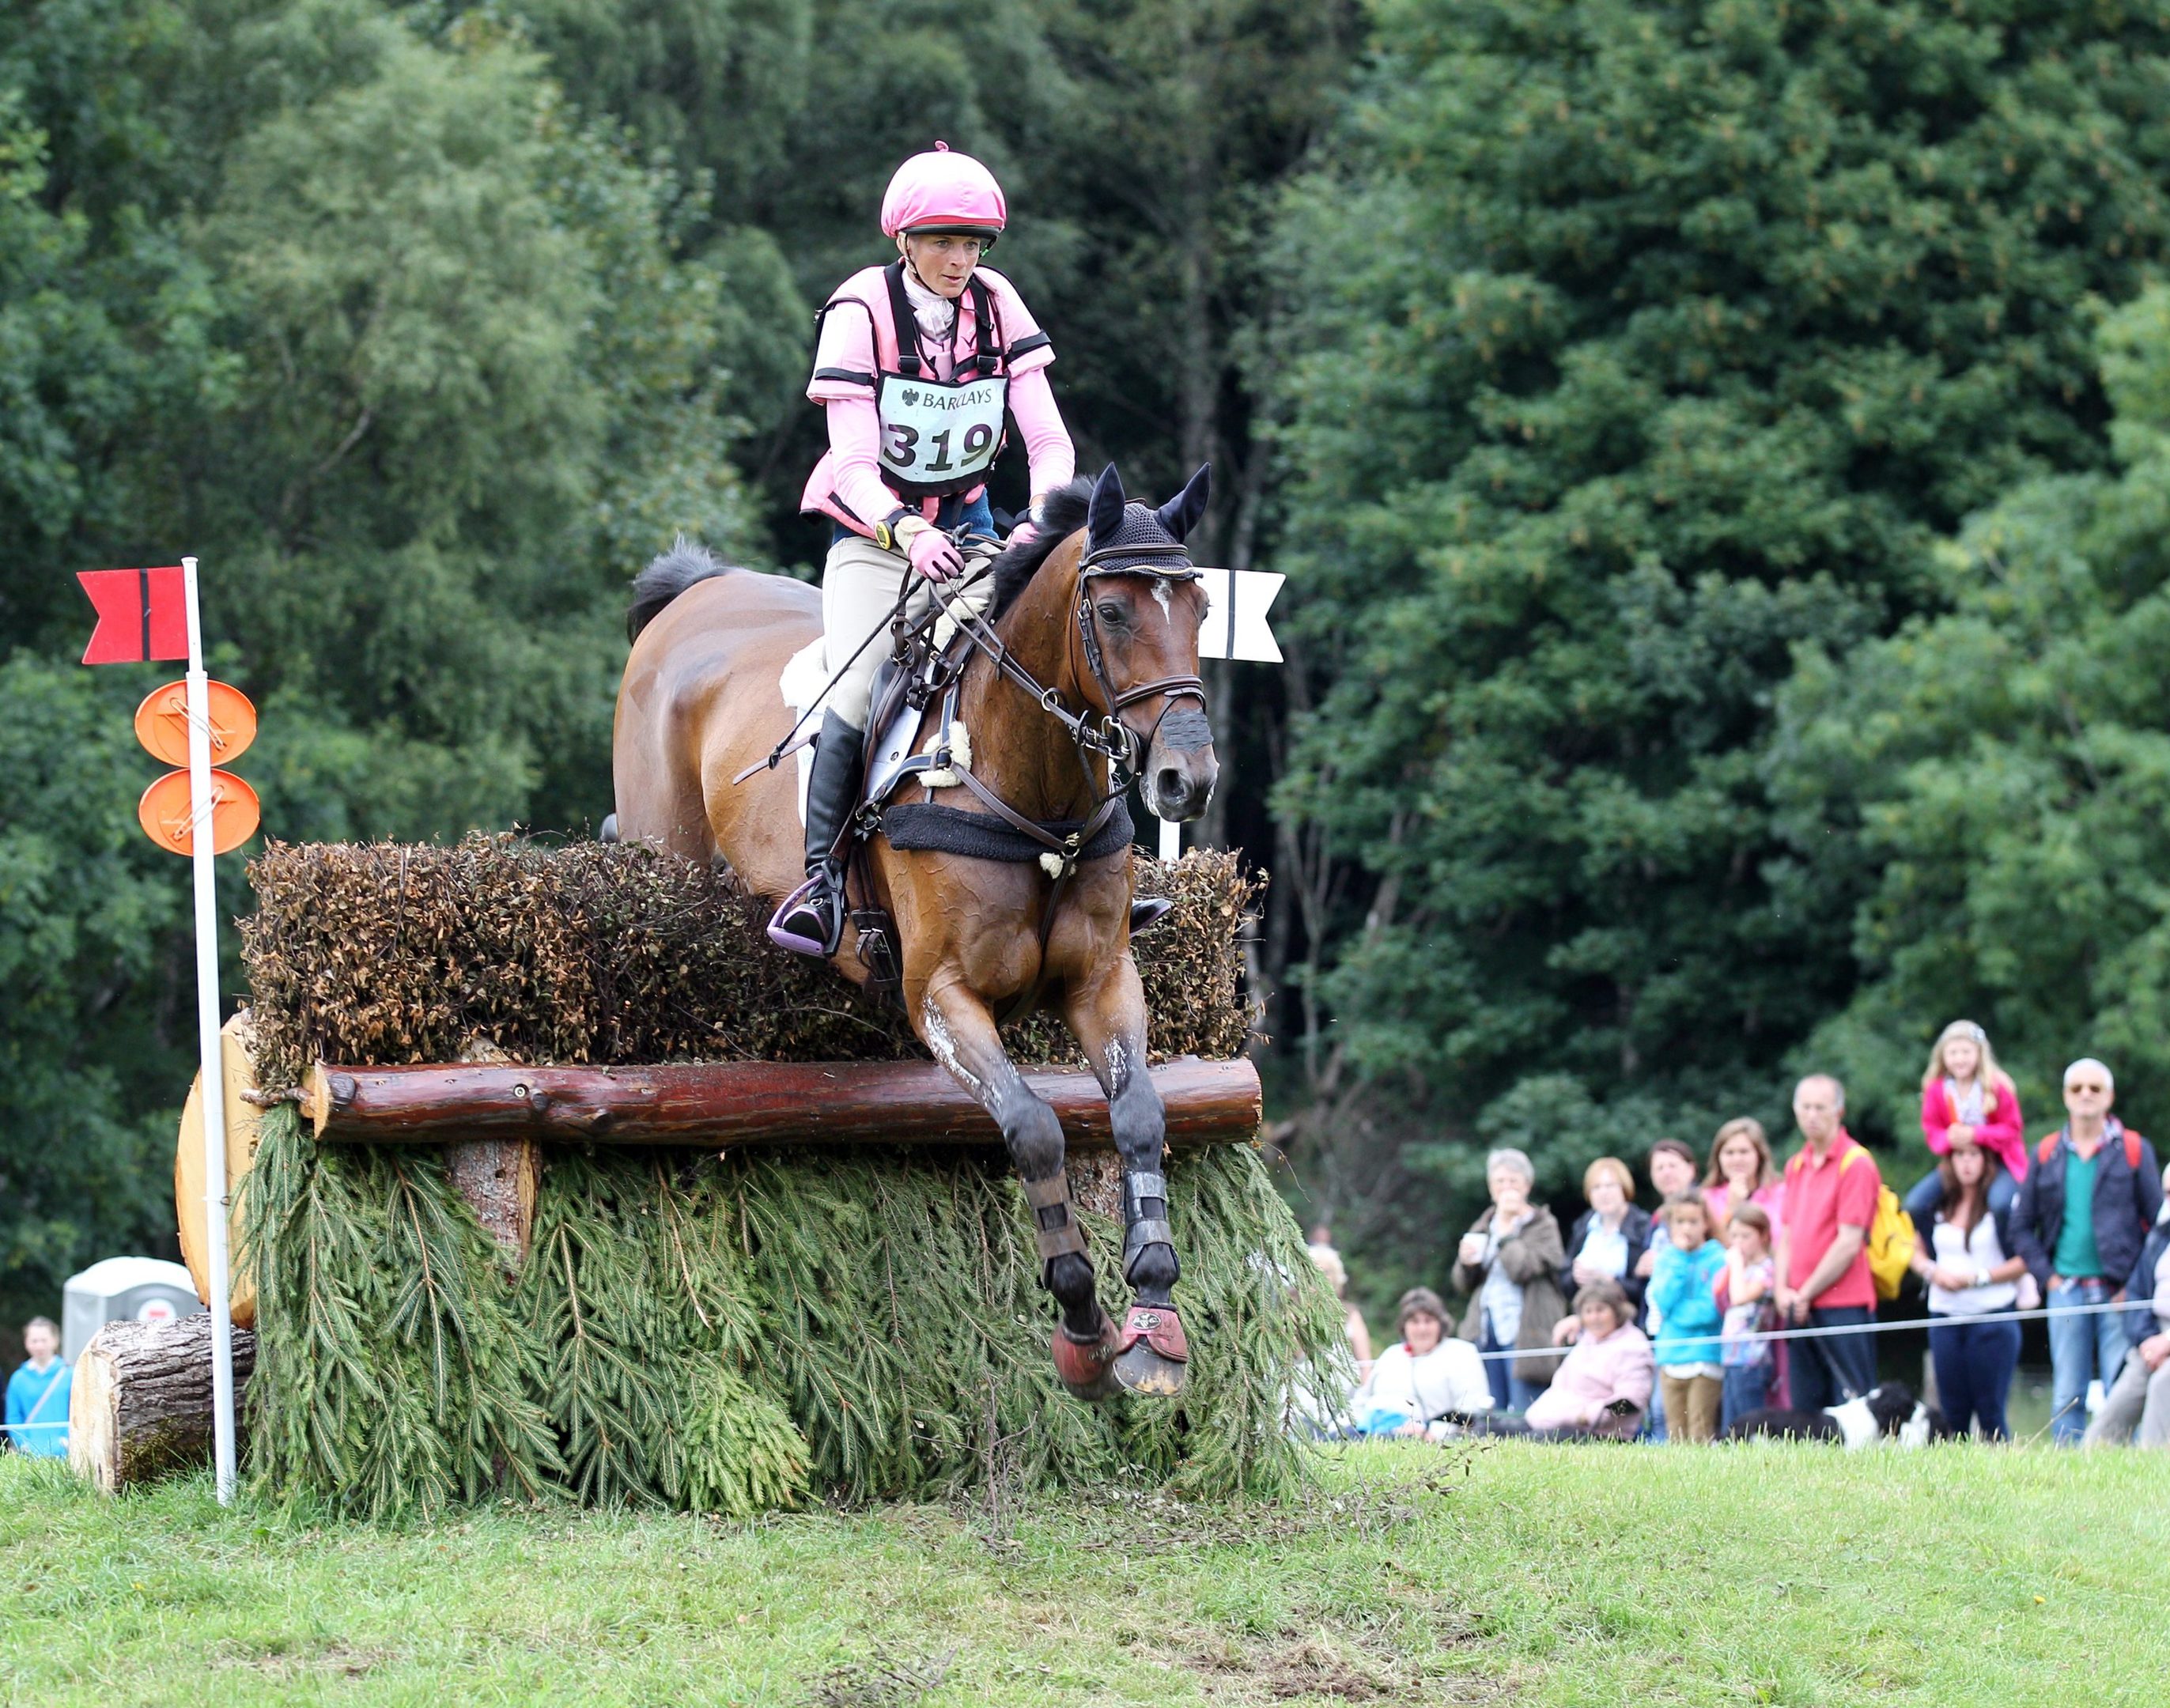 Blair Castle International Horse Trials which benefited from broadband thanks to HPCP.